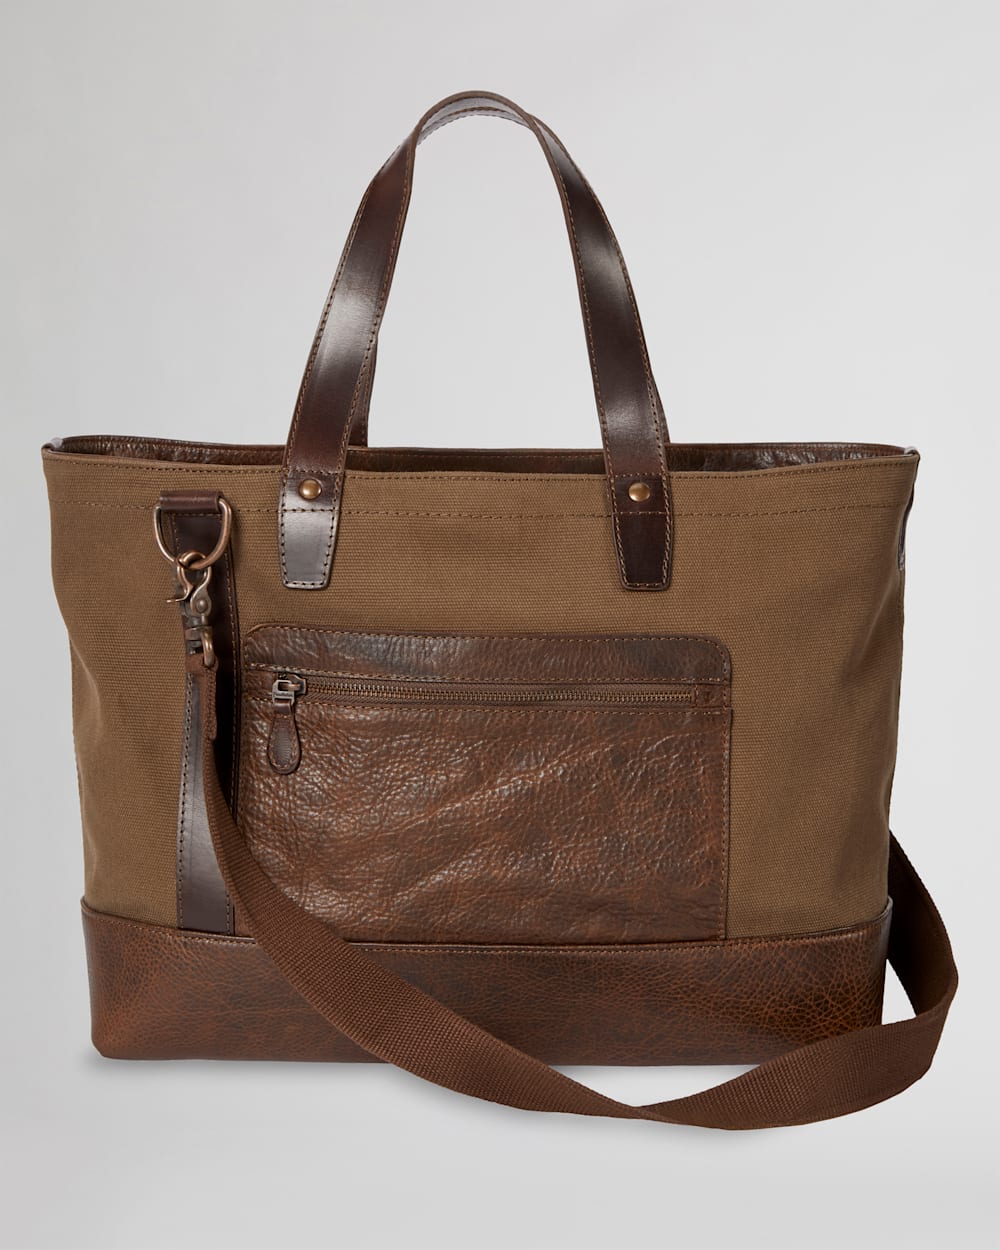 ALTERNATE VIEW OF WYETH TRAIL AFTERNOON TOTE IN BEIGE image number 2